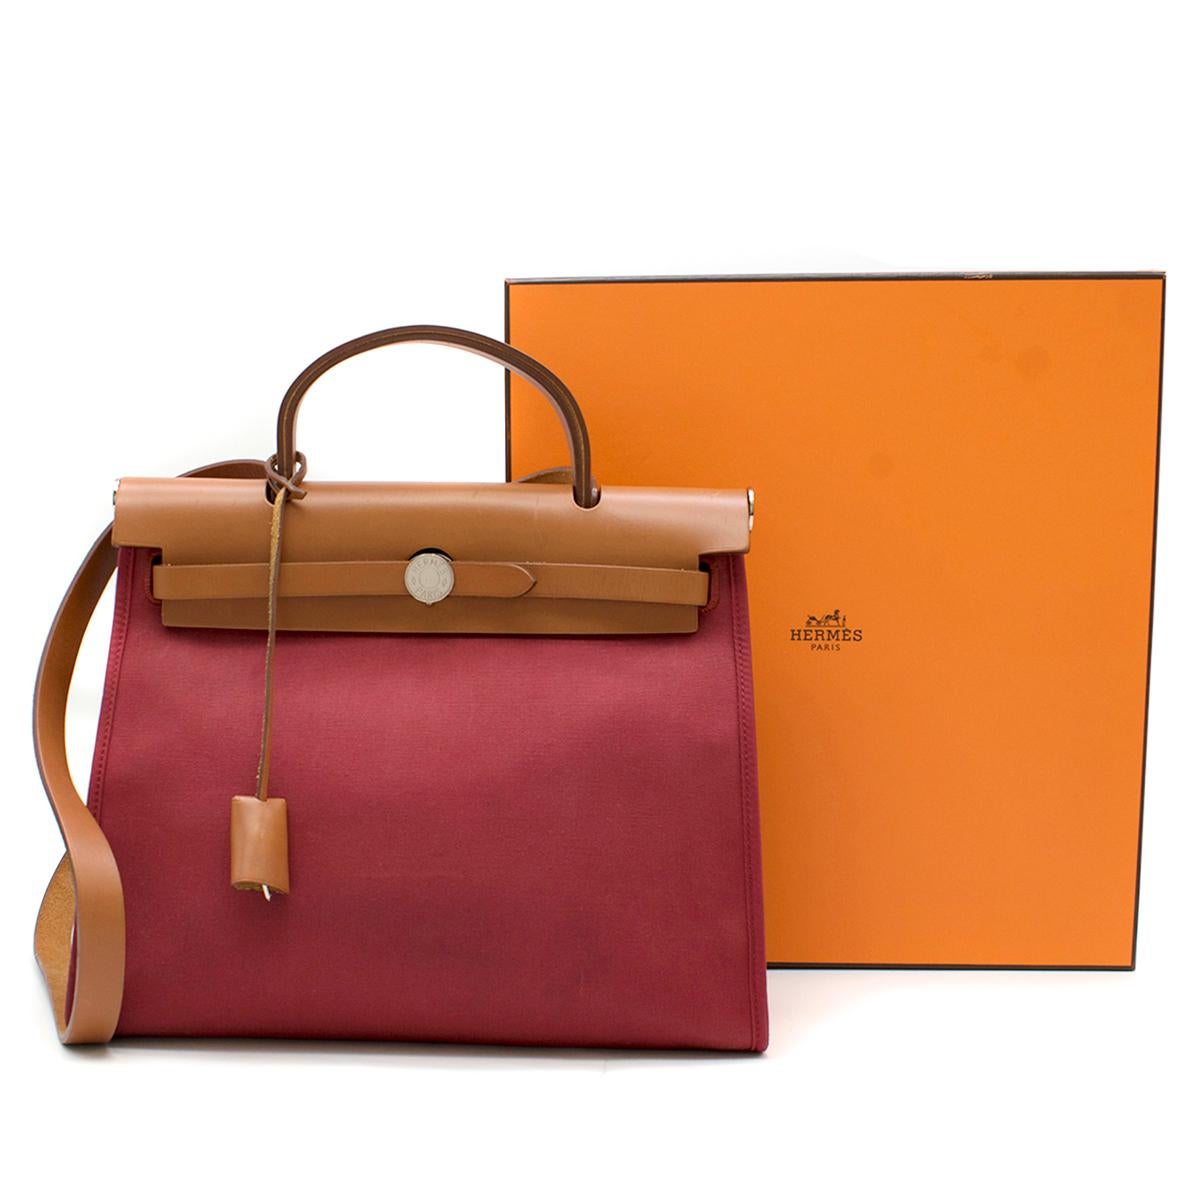 Hermes Rouge Garance Canvas & Leather Herbag Zip PM Bag

- Date Stamp N in a square (Circa 2010)
- Rouge Garance
- Canvas 
- Caramel-tone calfskin leather round top handle and shoulder strap
- Foldover leather top
- Signature palladium plated